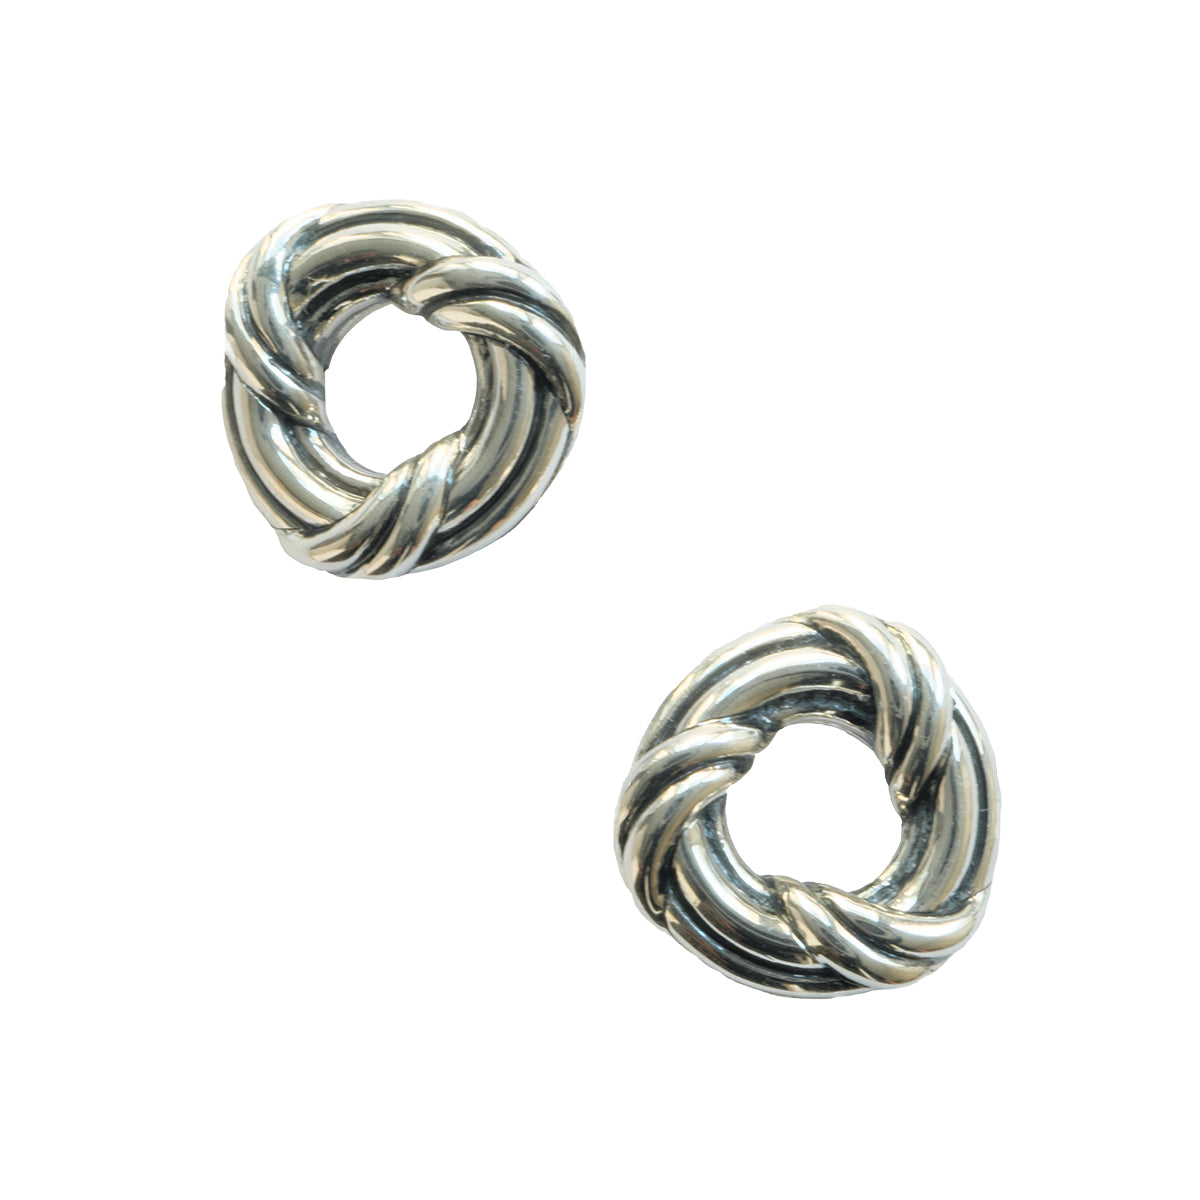 Peter Thomas Roth Ribbon & Reed Signature Classic Criss Cross Earrings in Sterling Silver with White Topaz